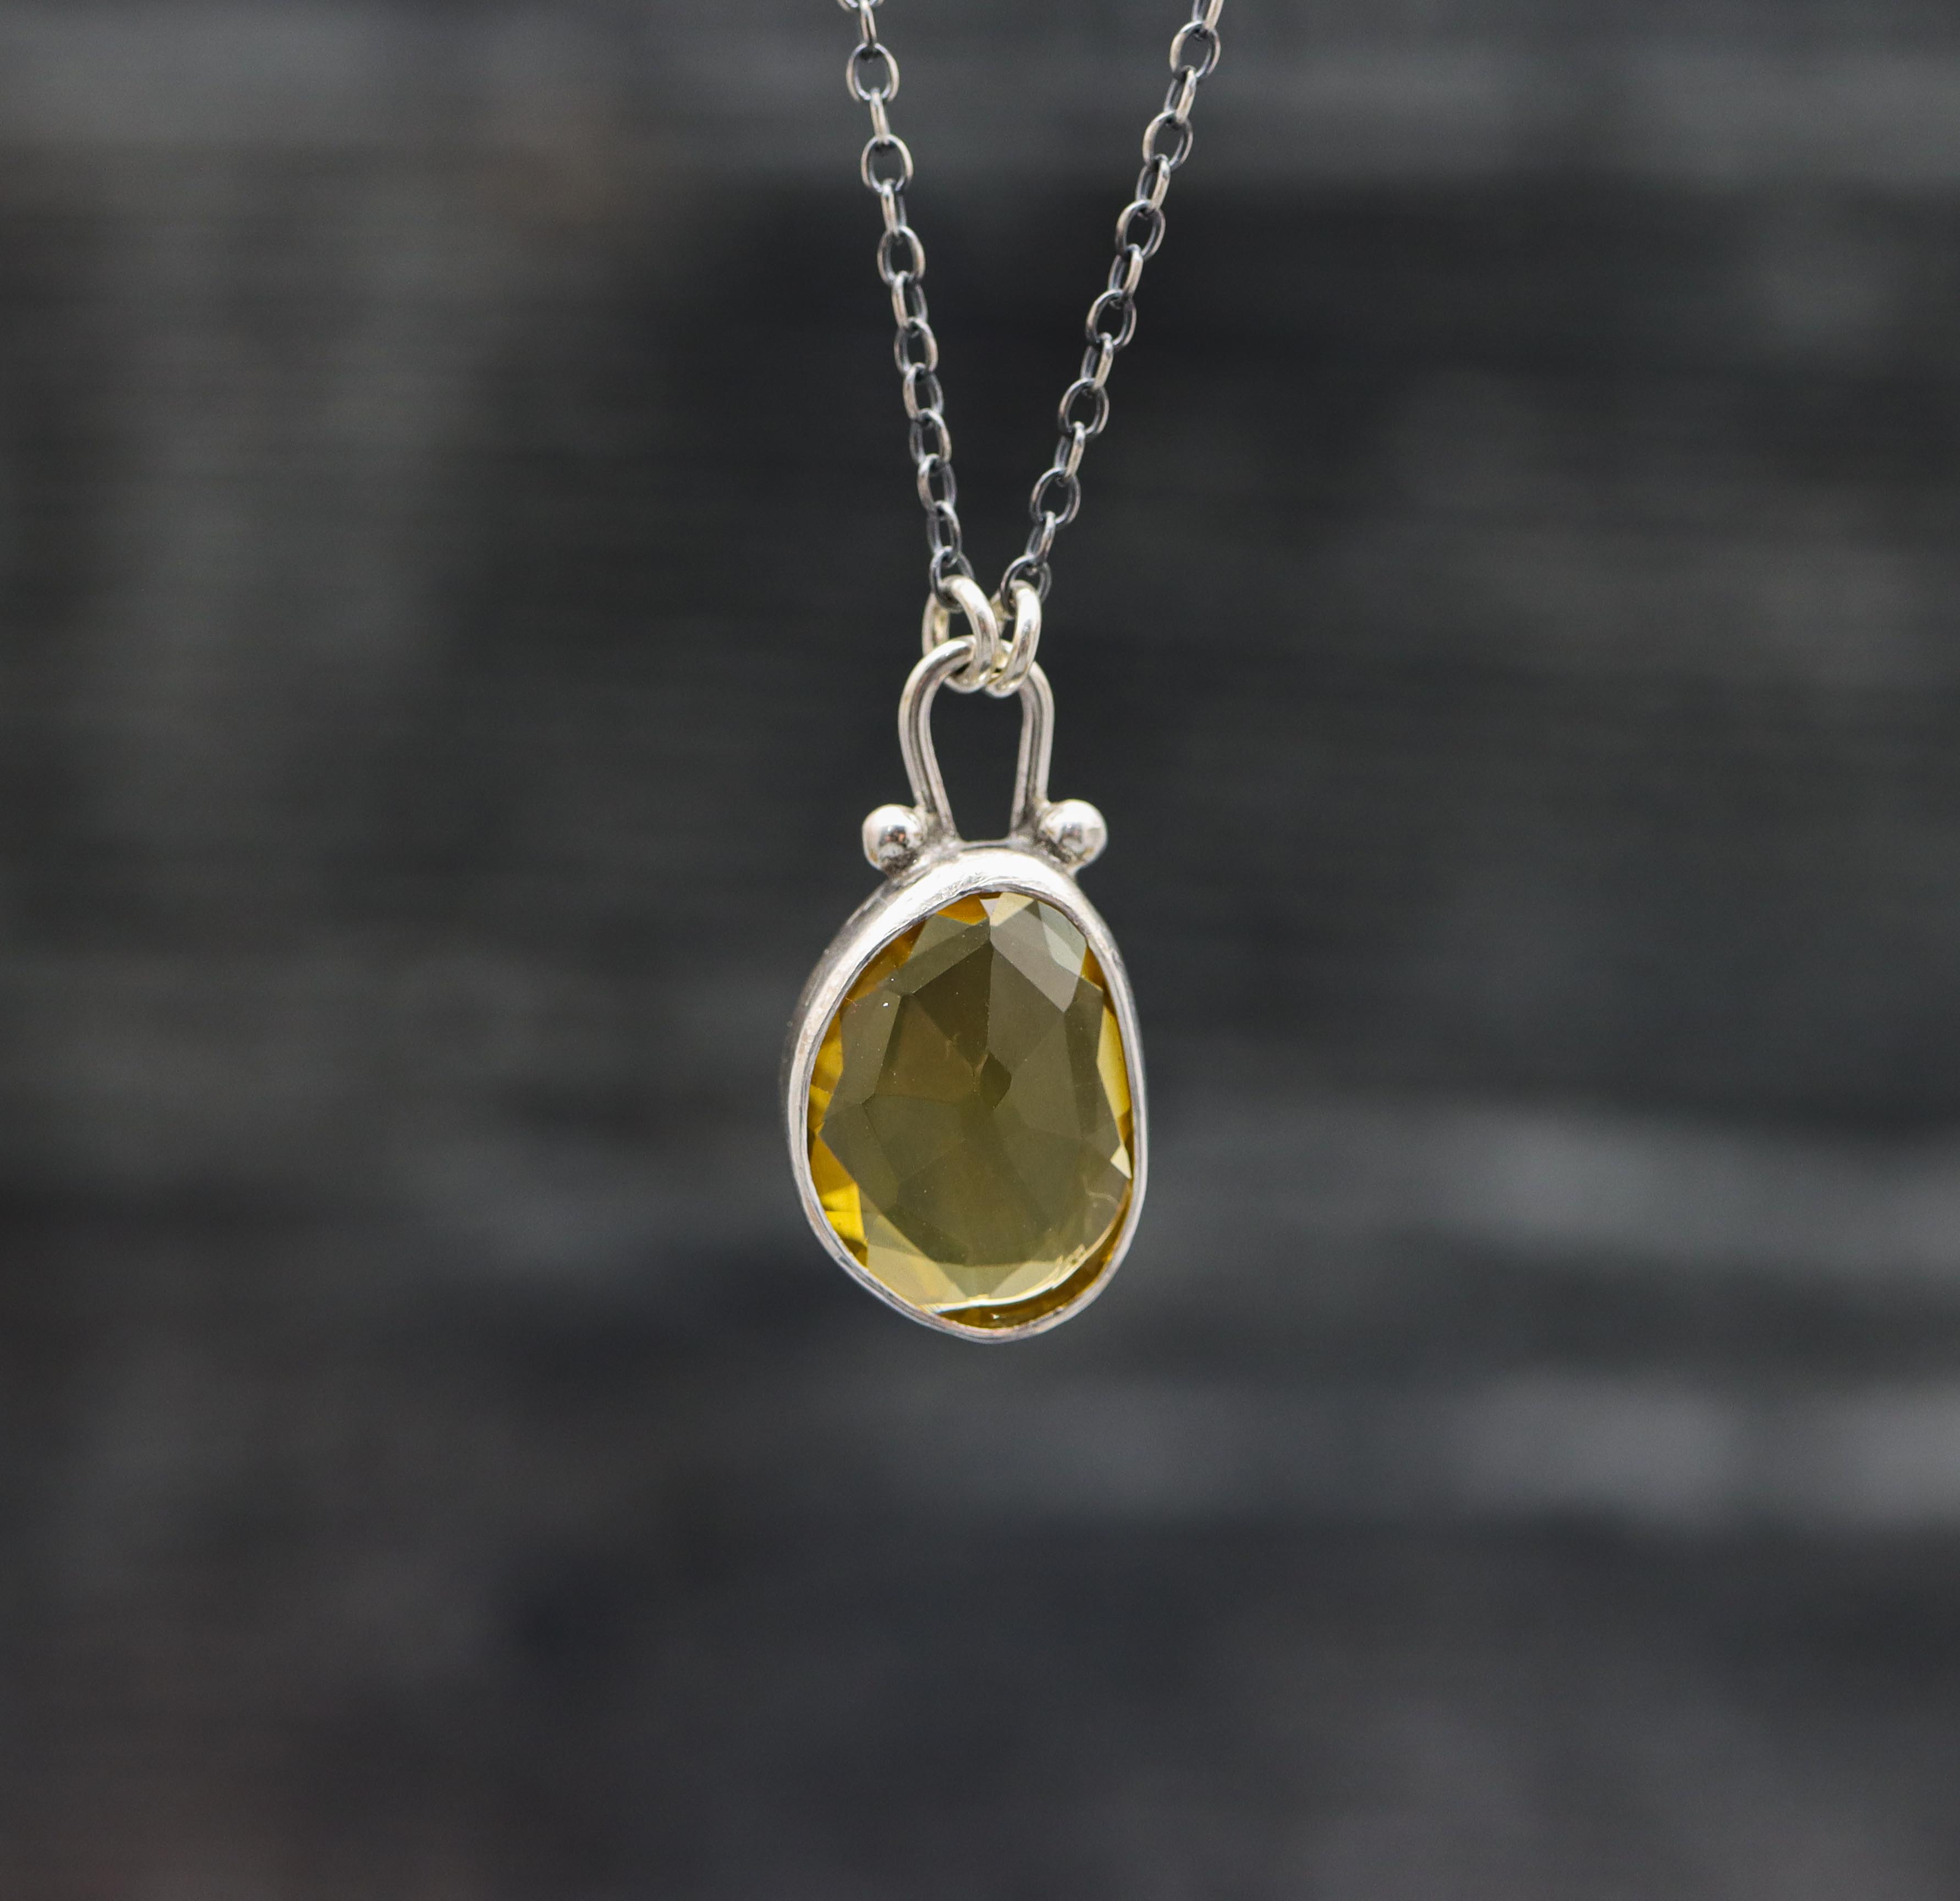 Sunny Yellow Citrine Pendant Necklace Sterling Silver